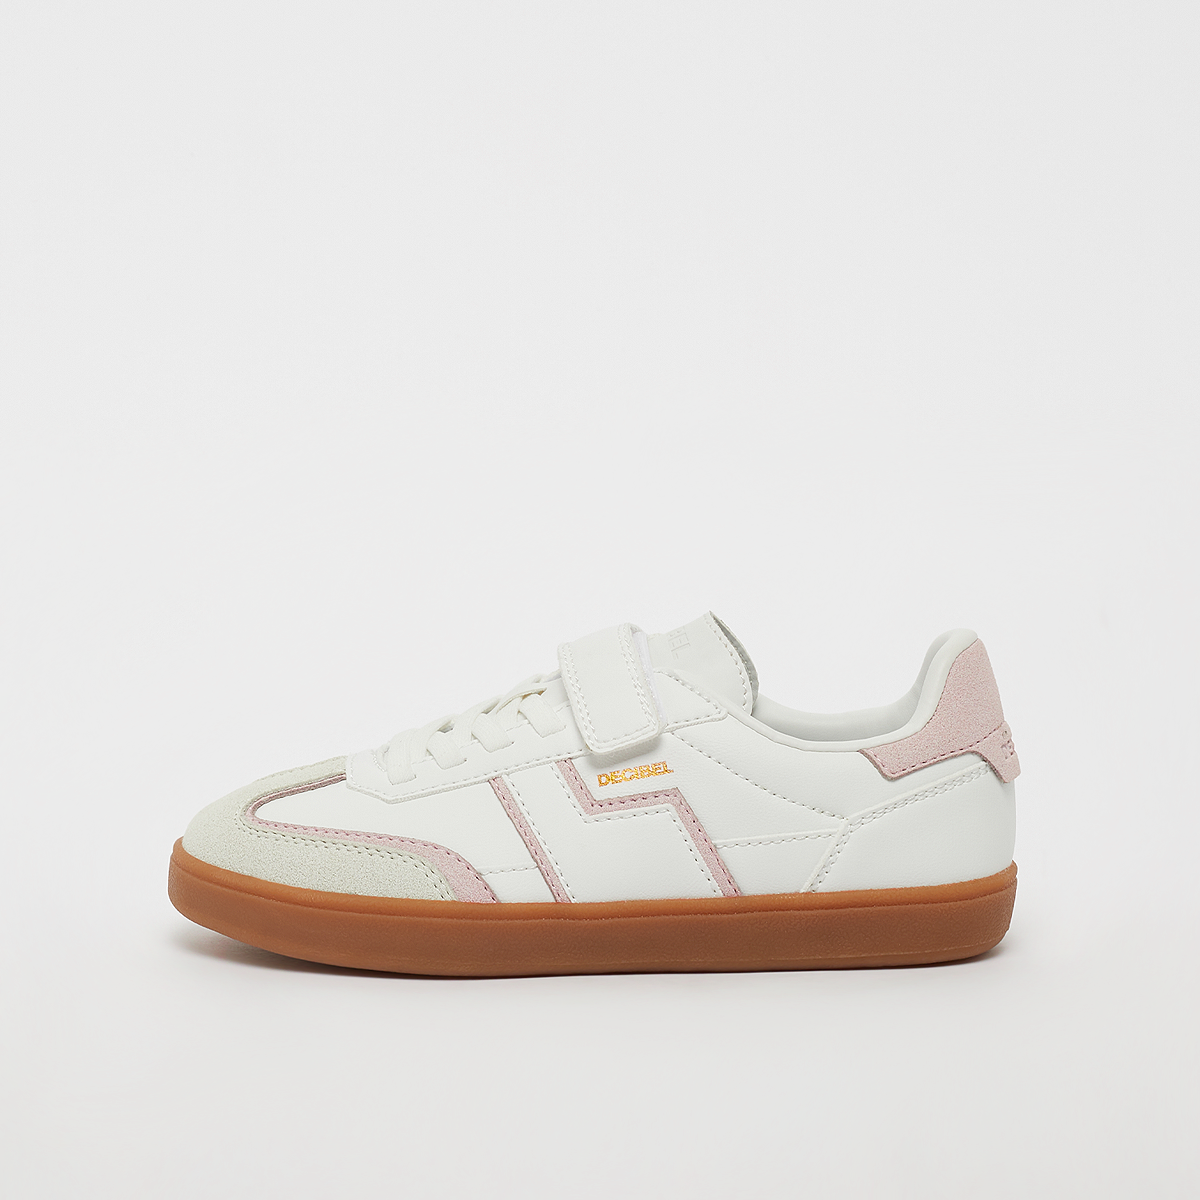 T Classic PS white/pink/gum, Decibel, Footwear, white/pink/gum, taille: 28